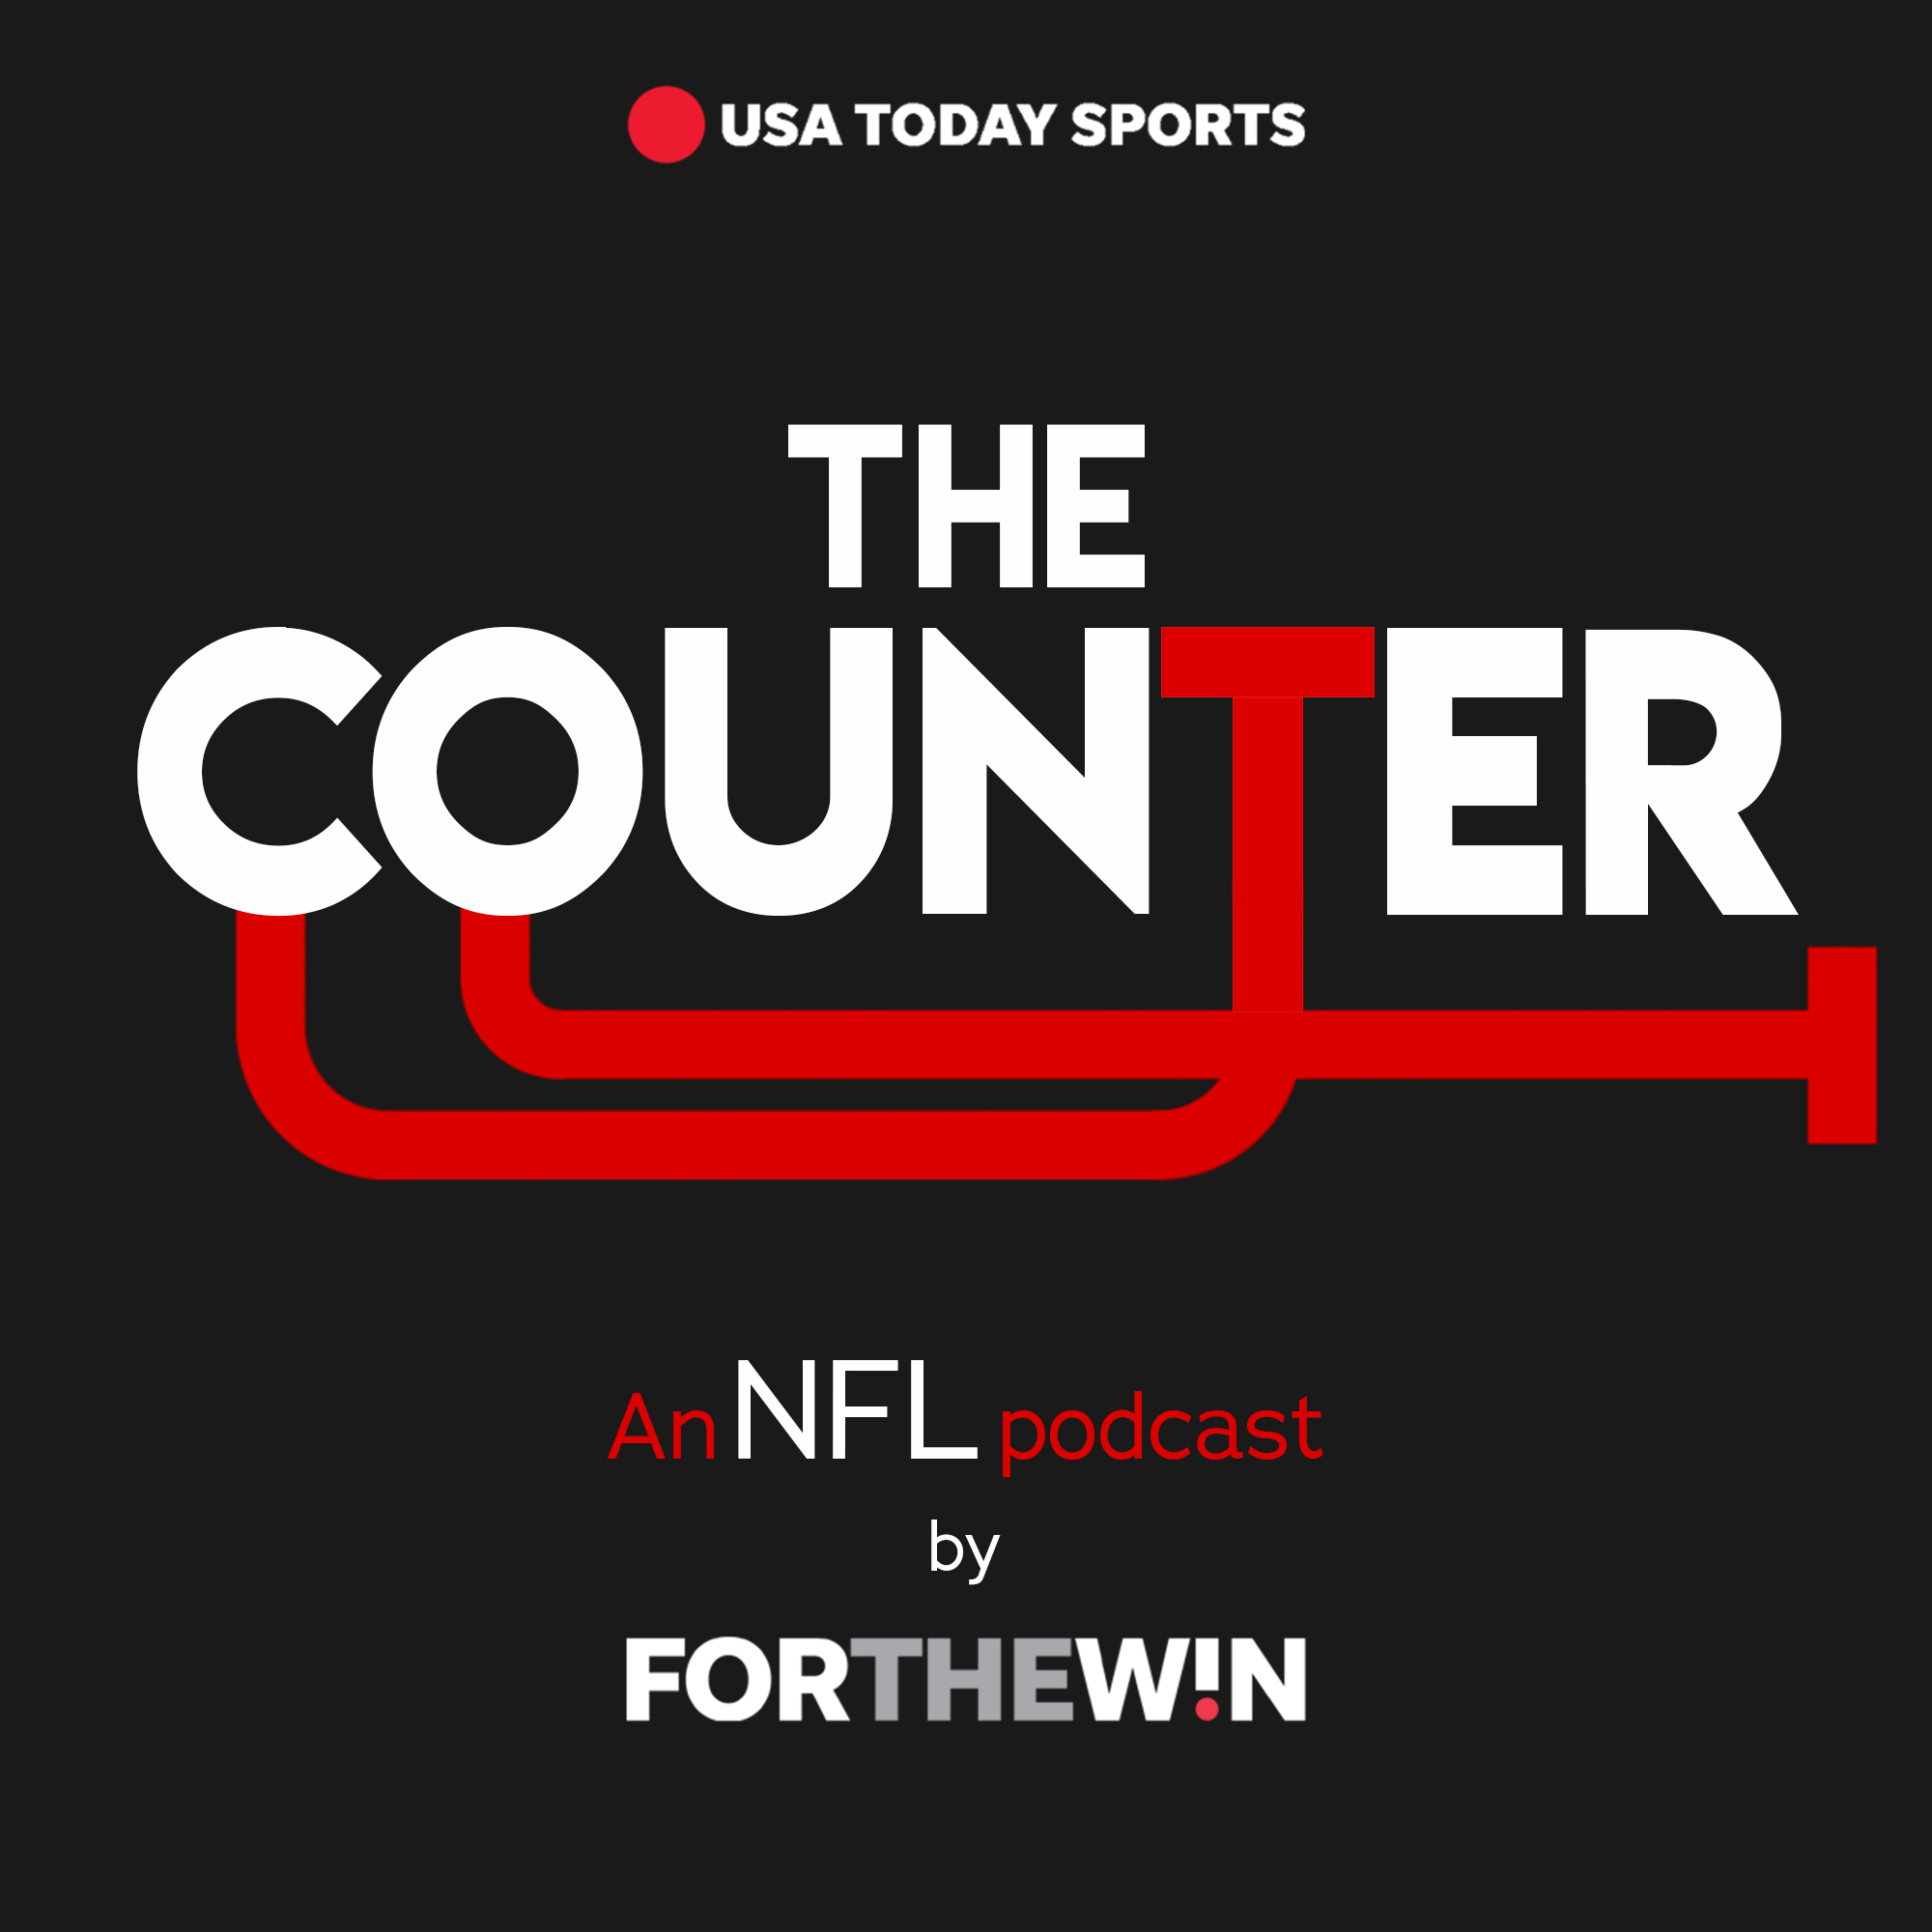 The Counter: An NFL Podcast by For The Win - @CoachVass joins the show to talk about the emergence of Brandon Staley